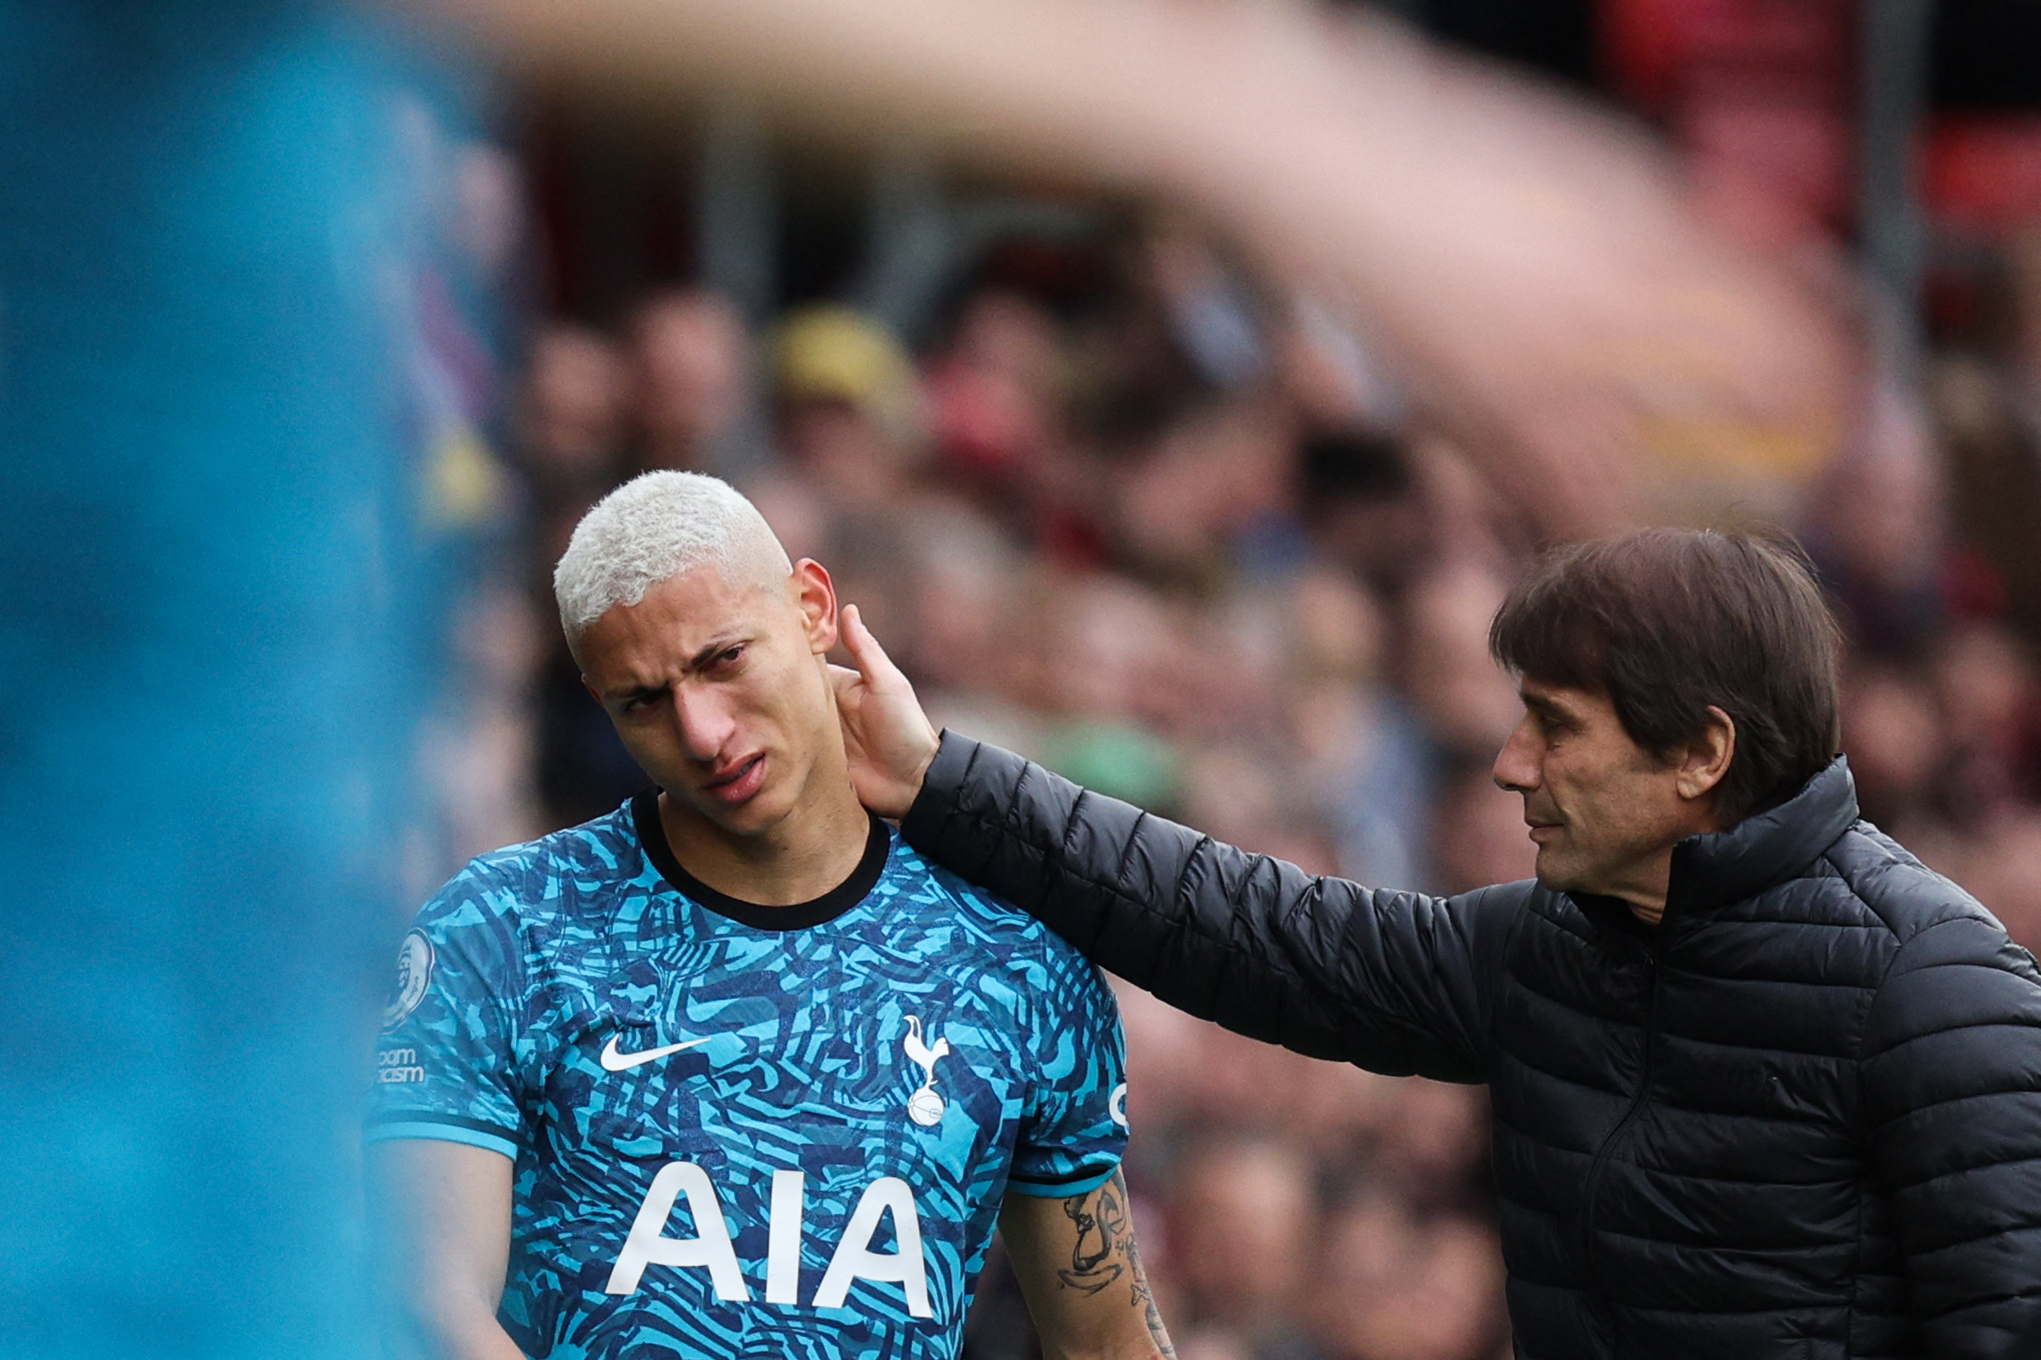 Antonio Conte attempts to comfort Richarlison has he comes off the pitch early due to an injury.